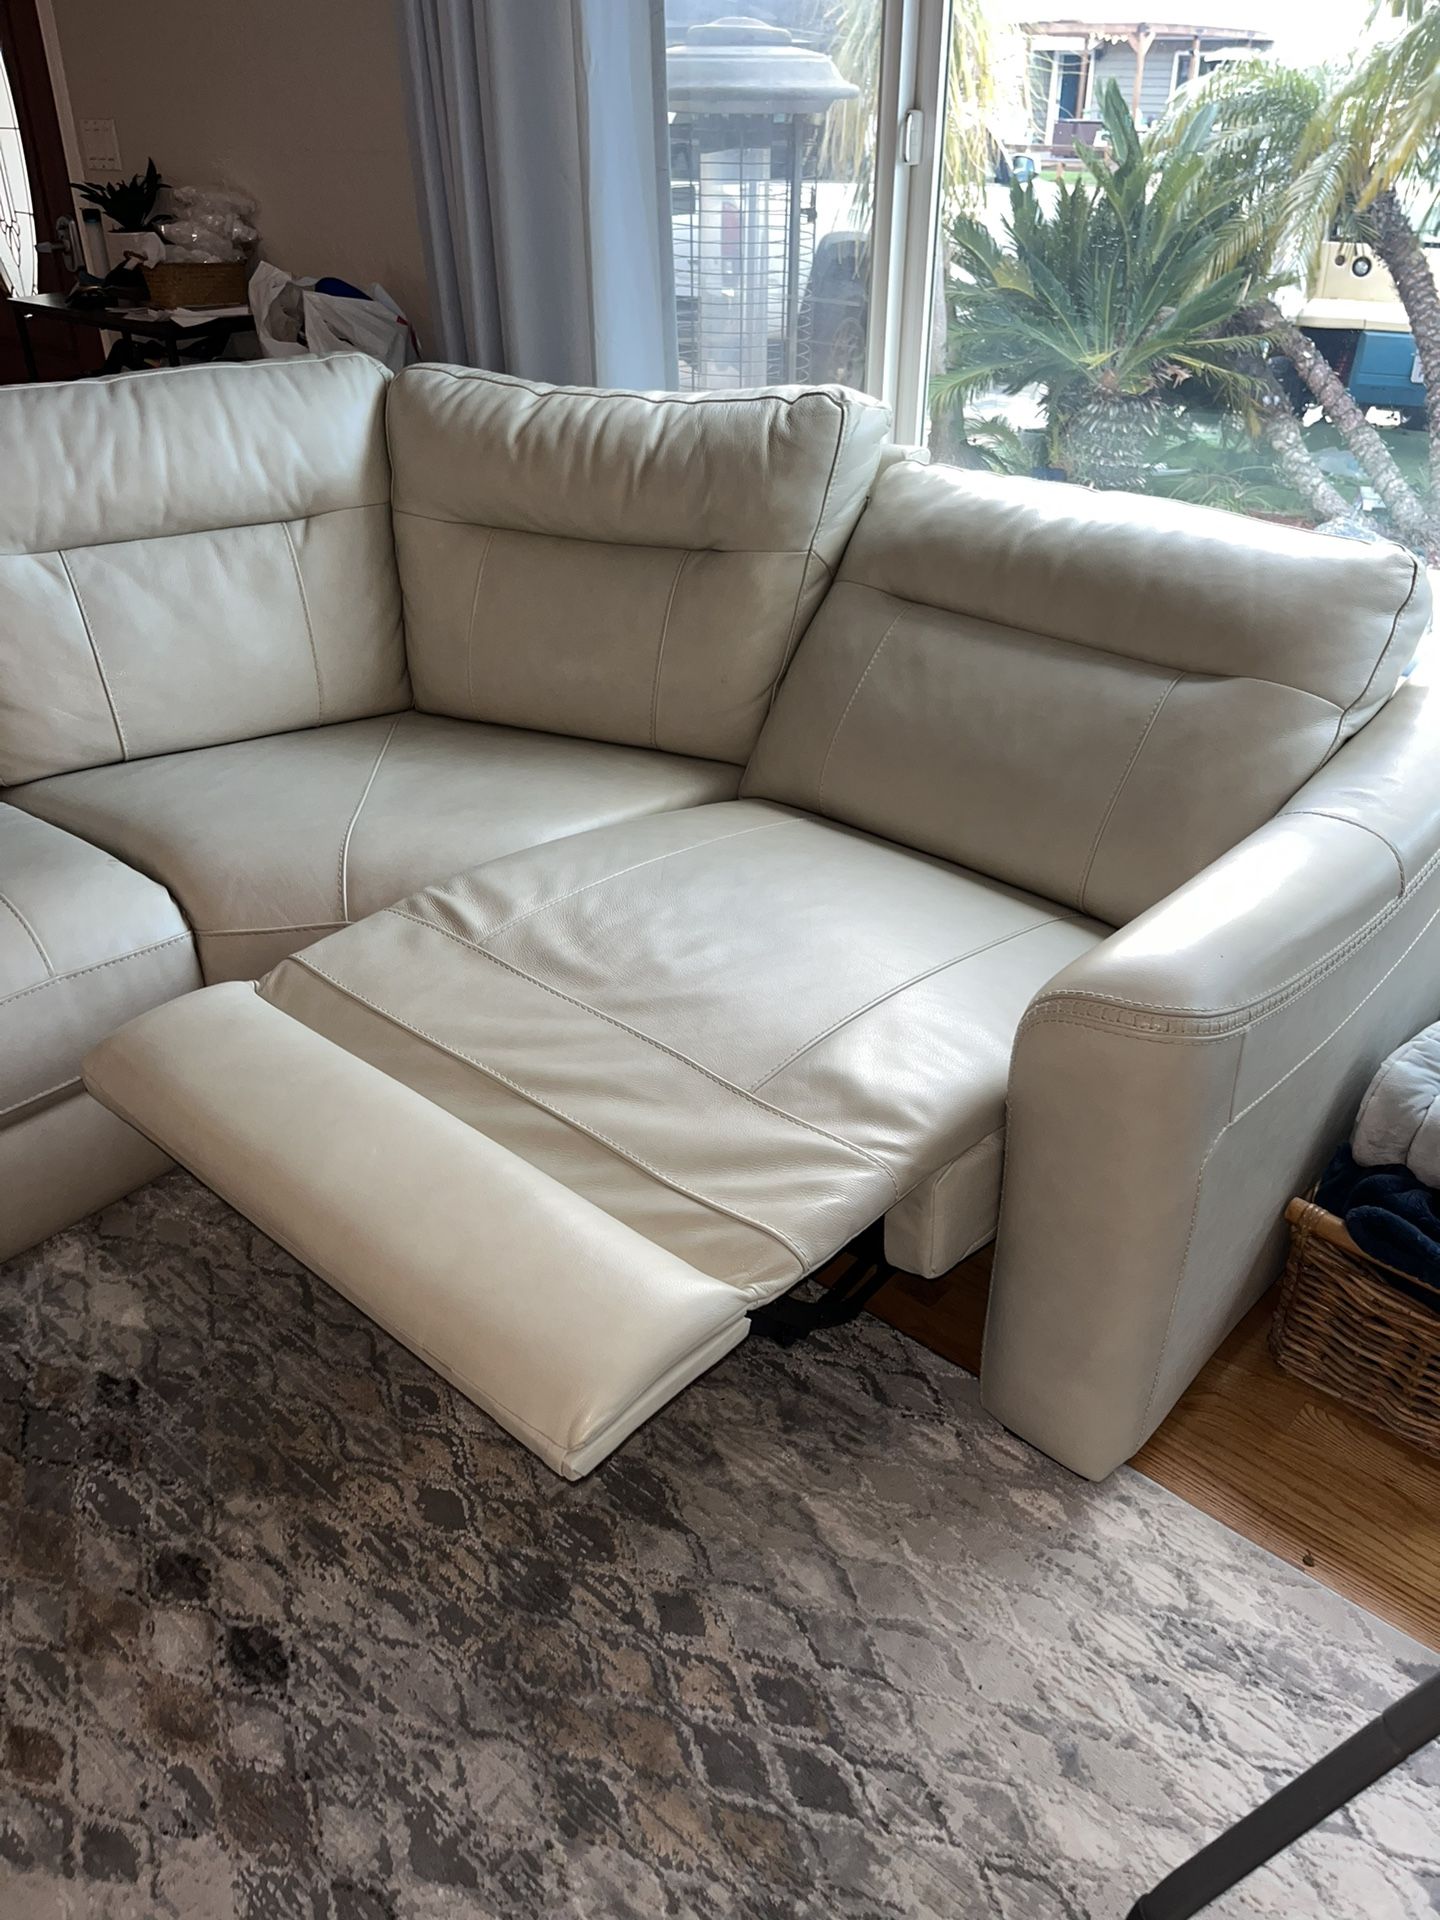 Jerome’s Premium Leather Cream Recliner Sectional